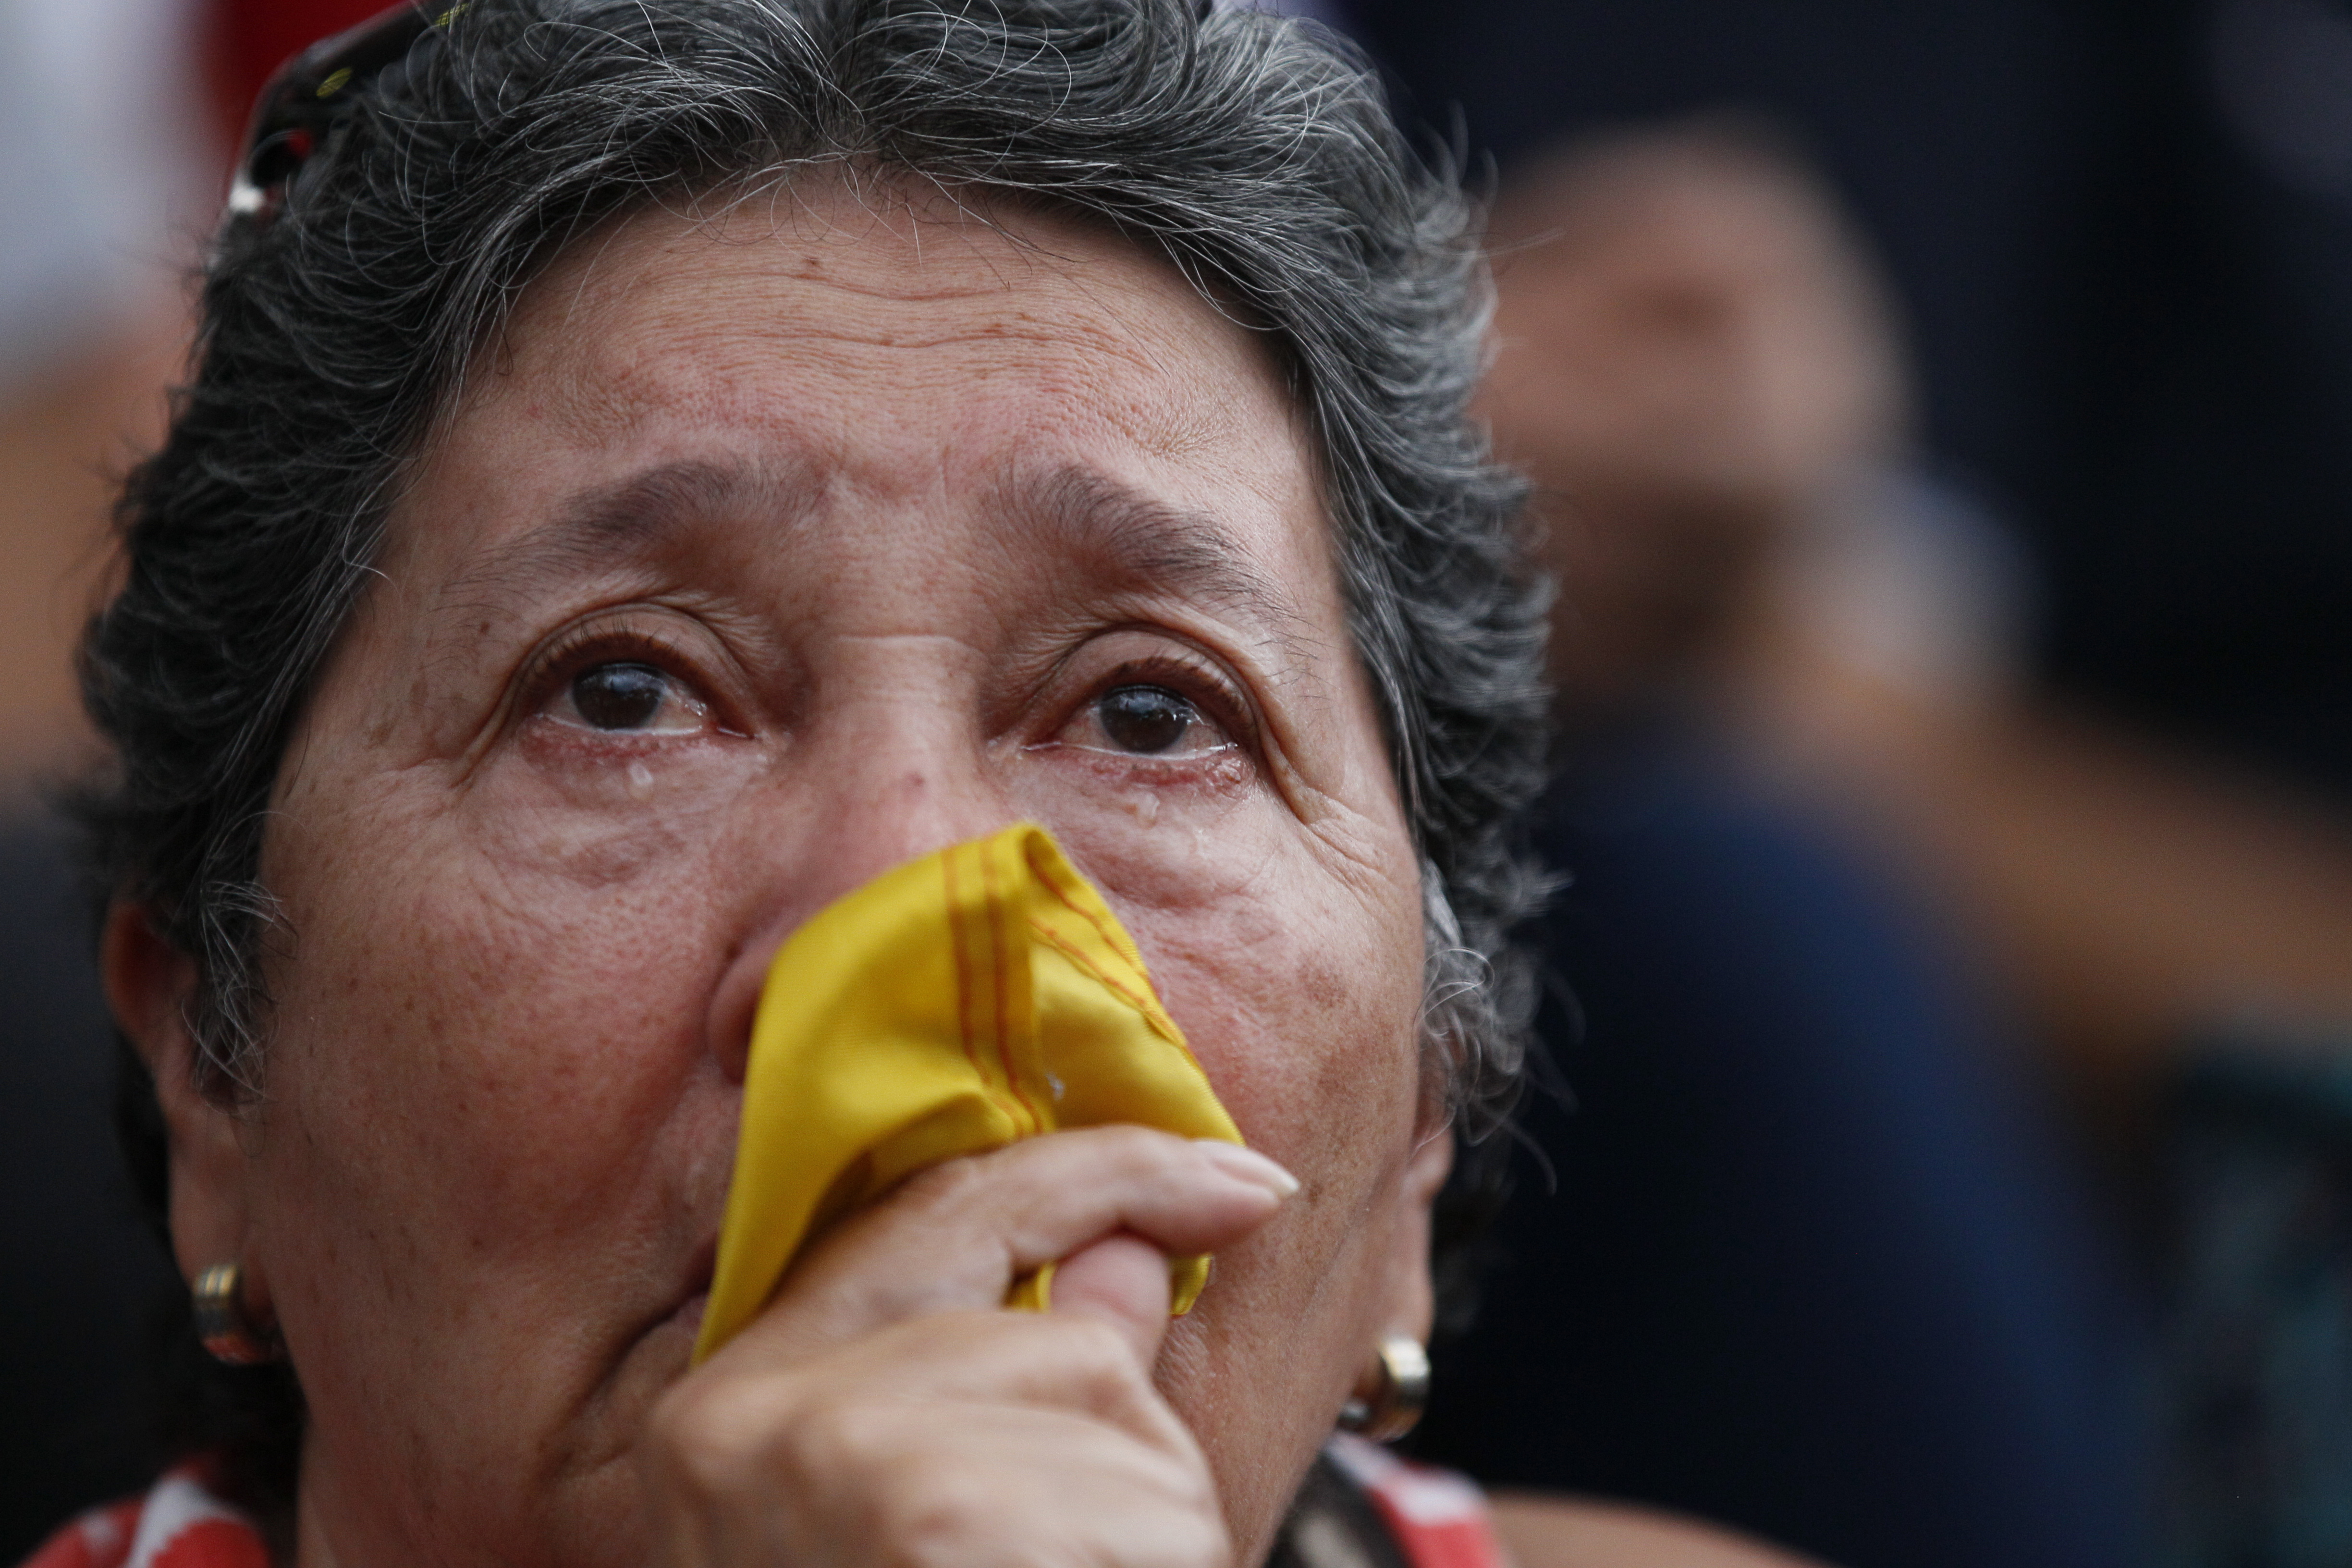 An anti-government demonstrator cries during a vigil in honor of those who have been killed during clashes between security forces and demonstrators in Caracas, Venezuela, Monday, July 31, 2017. Many analysts believe Sunday's vote for a newly elected assembly that will rewrite Venezuela’s constitution will catalyze yet more disturbances in a country that has seen four months of street protests in which at least 125 people have died. (AP Photo/Ariana Cubillos)